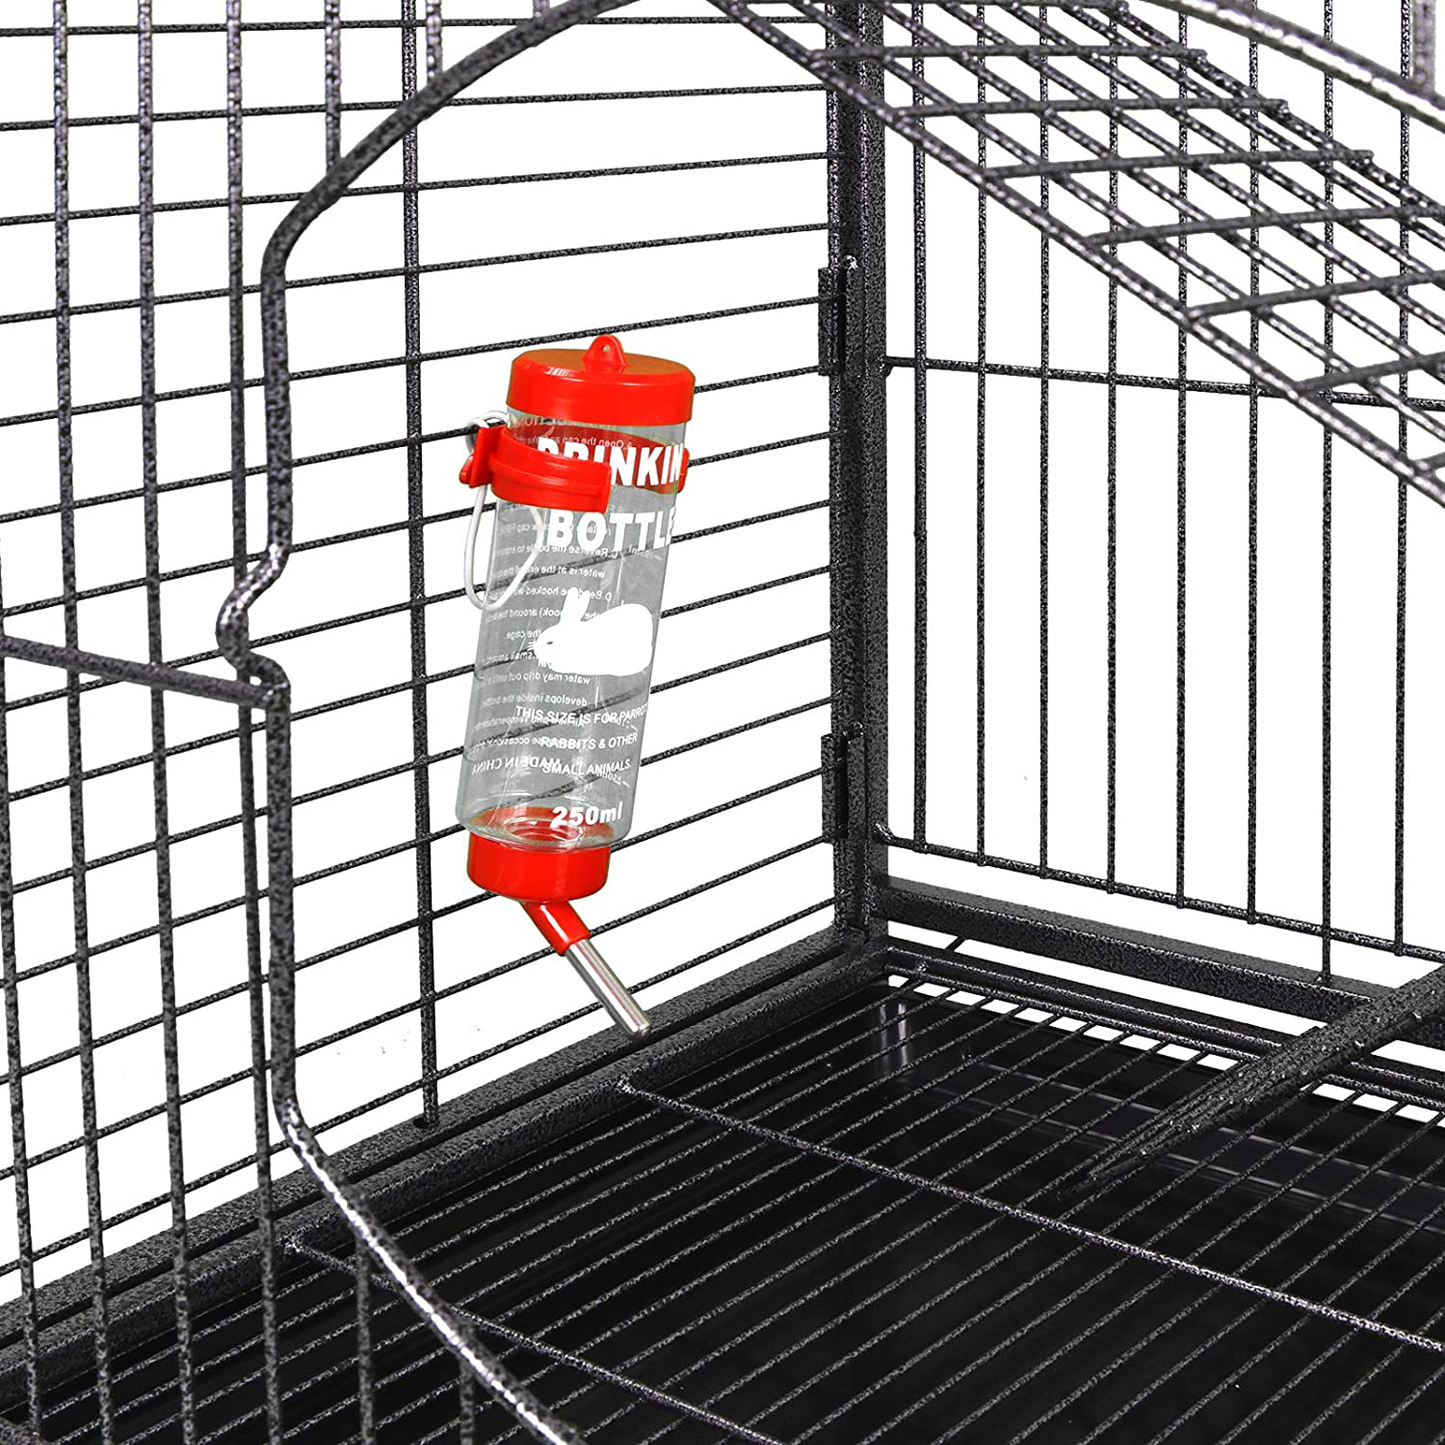 SUPER DEAL 37.2’’ Ferret Cage Chinchilla Guinea Pig Small Animal Cage - 4 Tiers - 3 Ladders - 2 Front Doors - Food Bowl - Water Bottle - Slide Out Trays - Swivel Casters